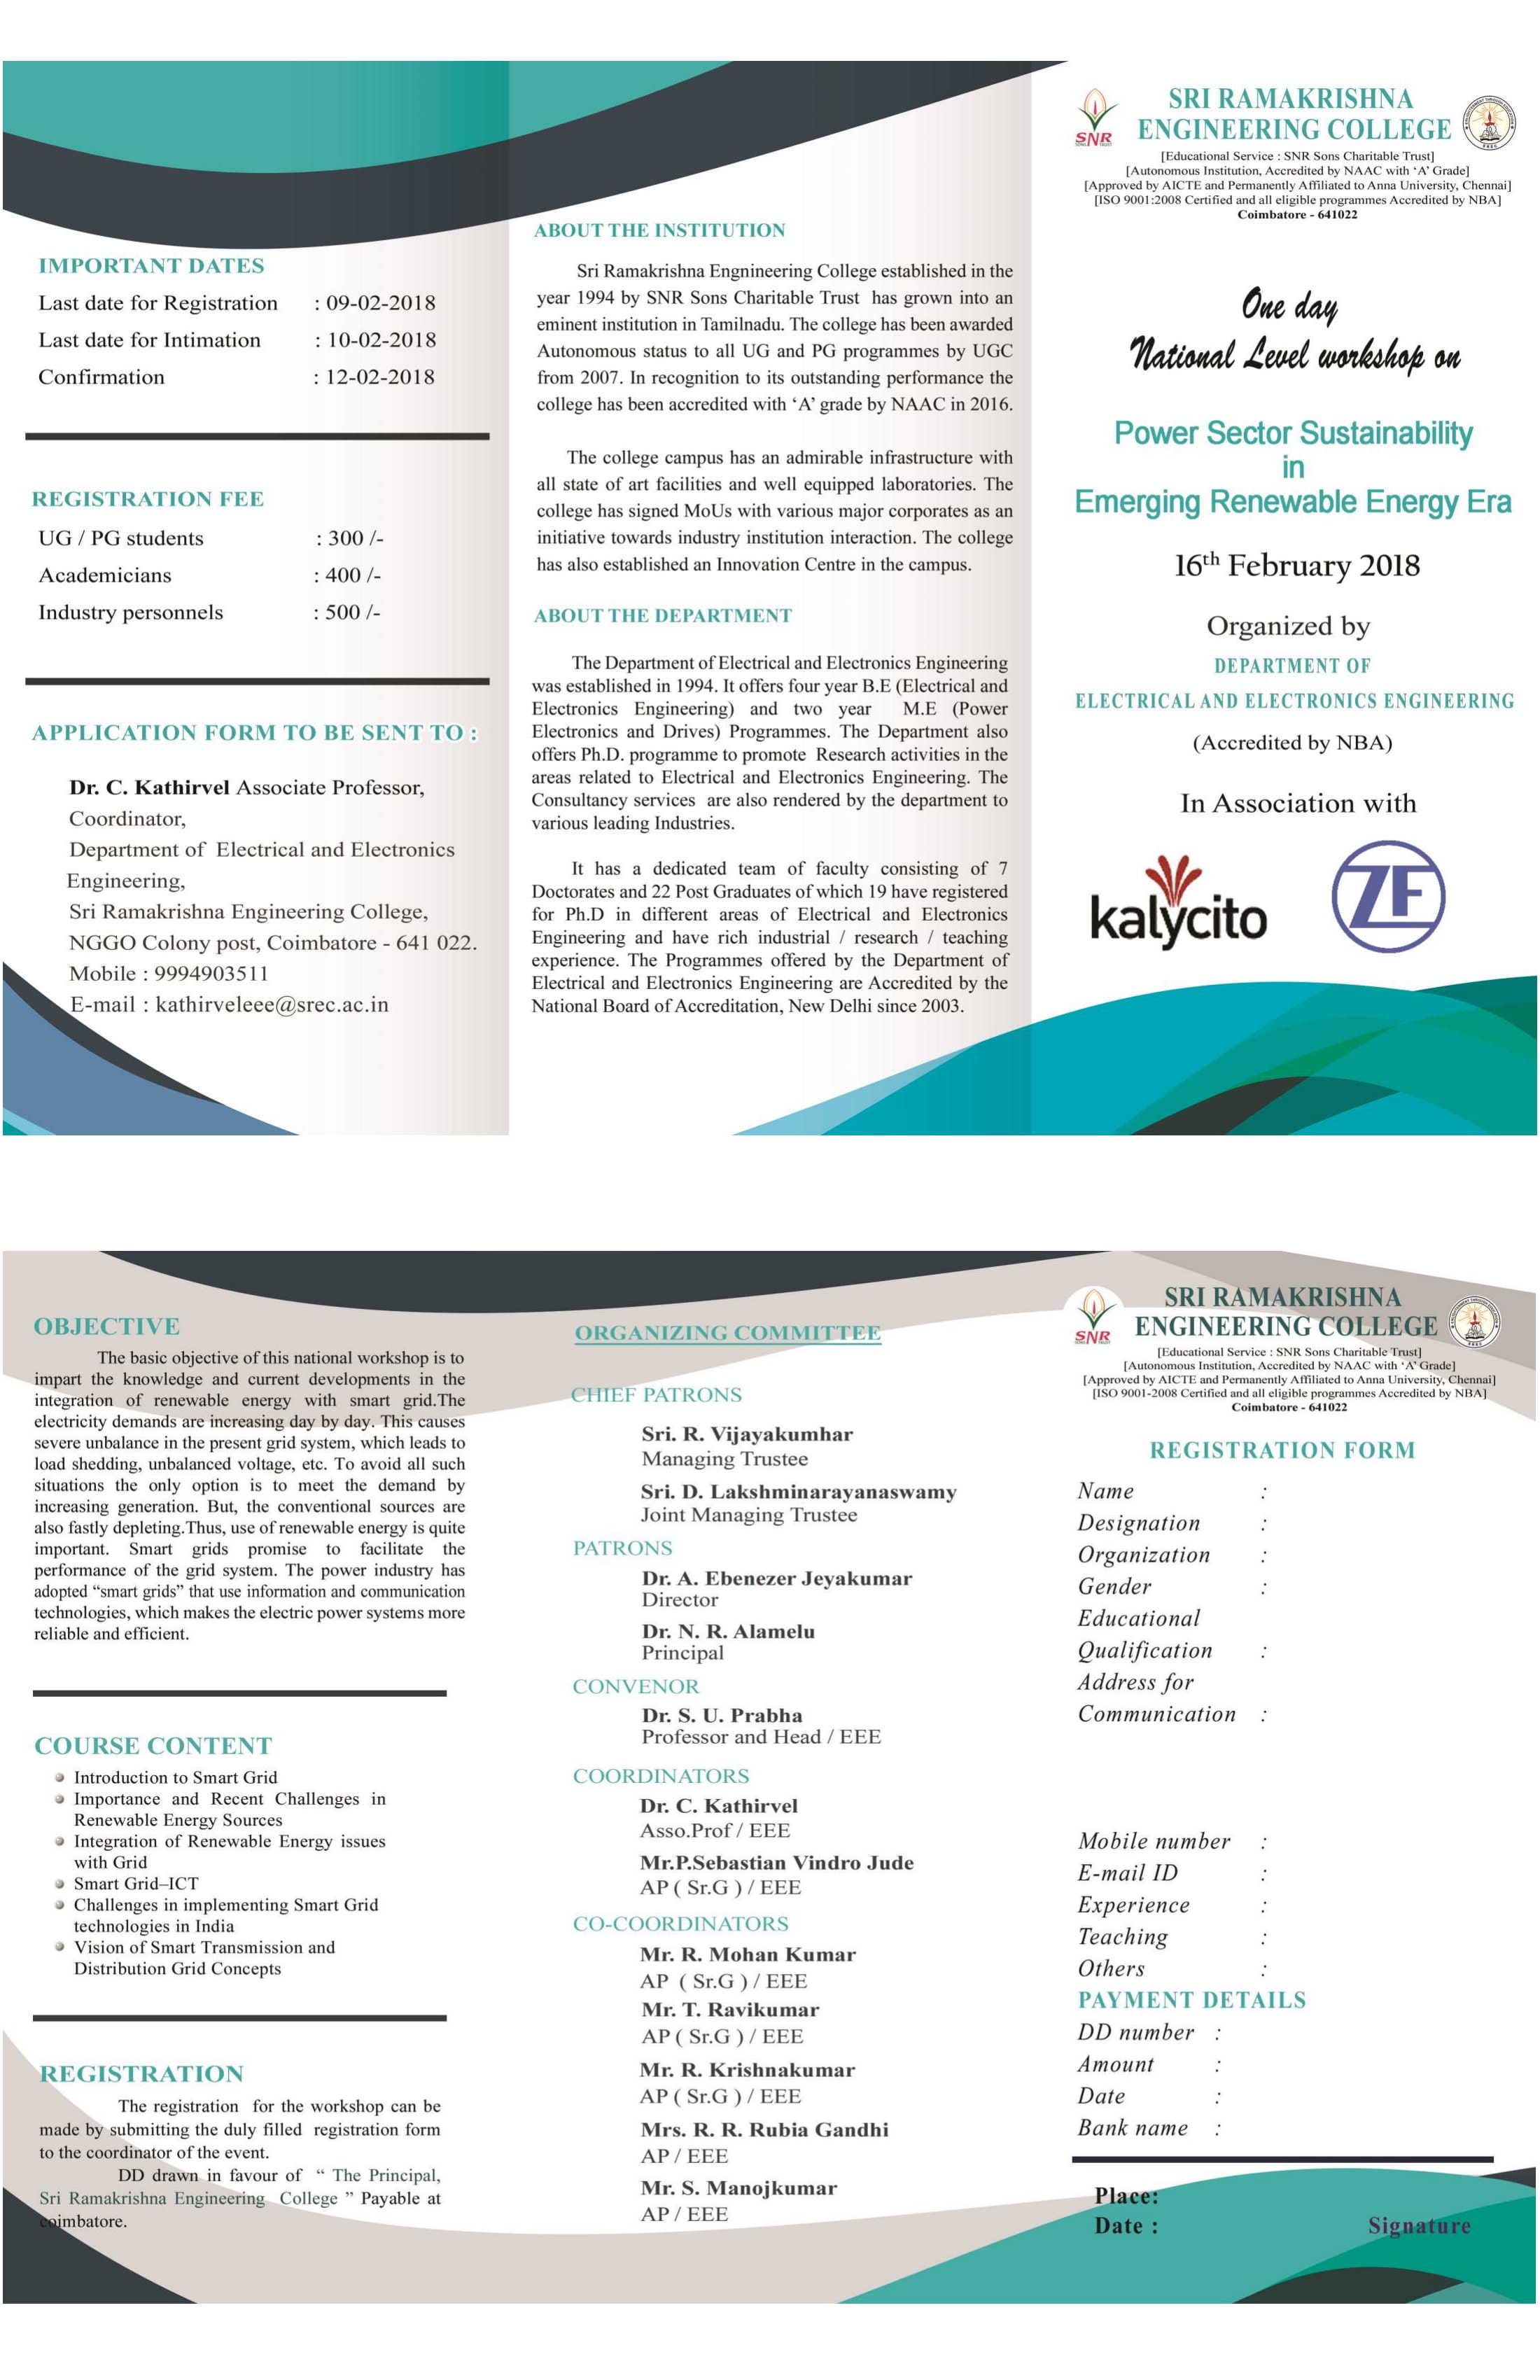 One Day National Level Workshop on Power Sector Sustainability in Emerging Renewable Energy Era 2018